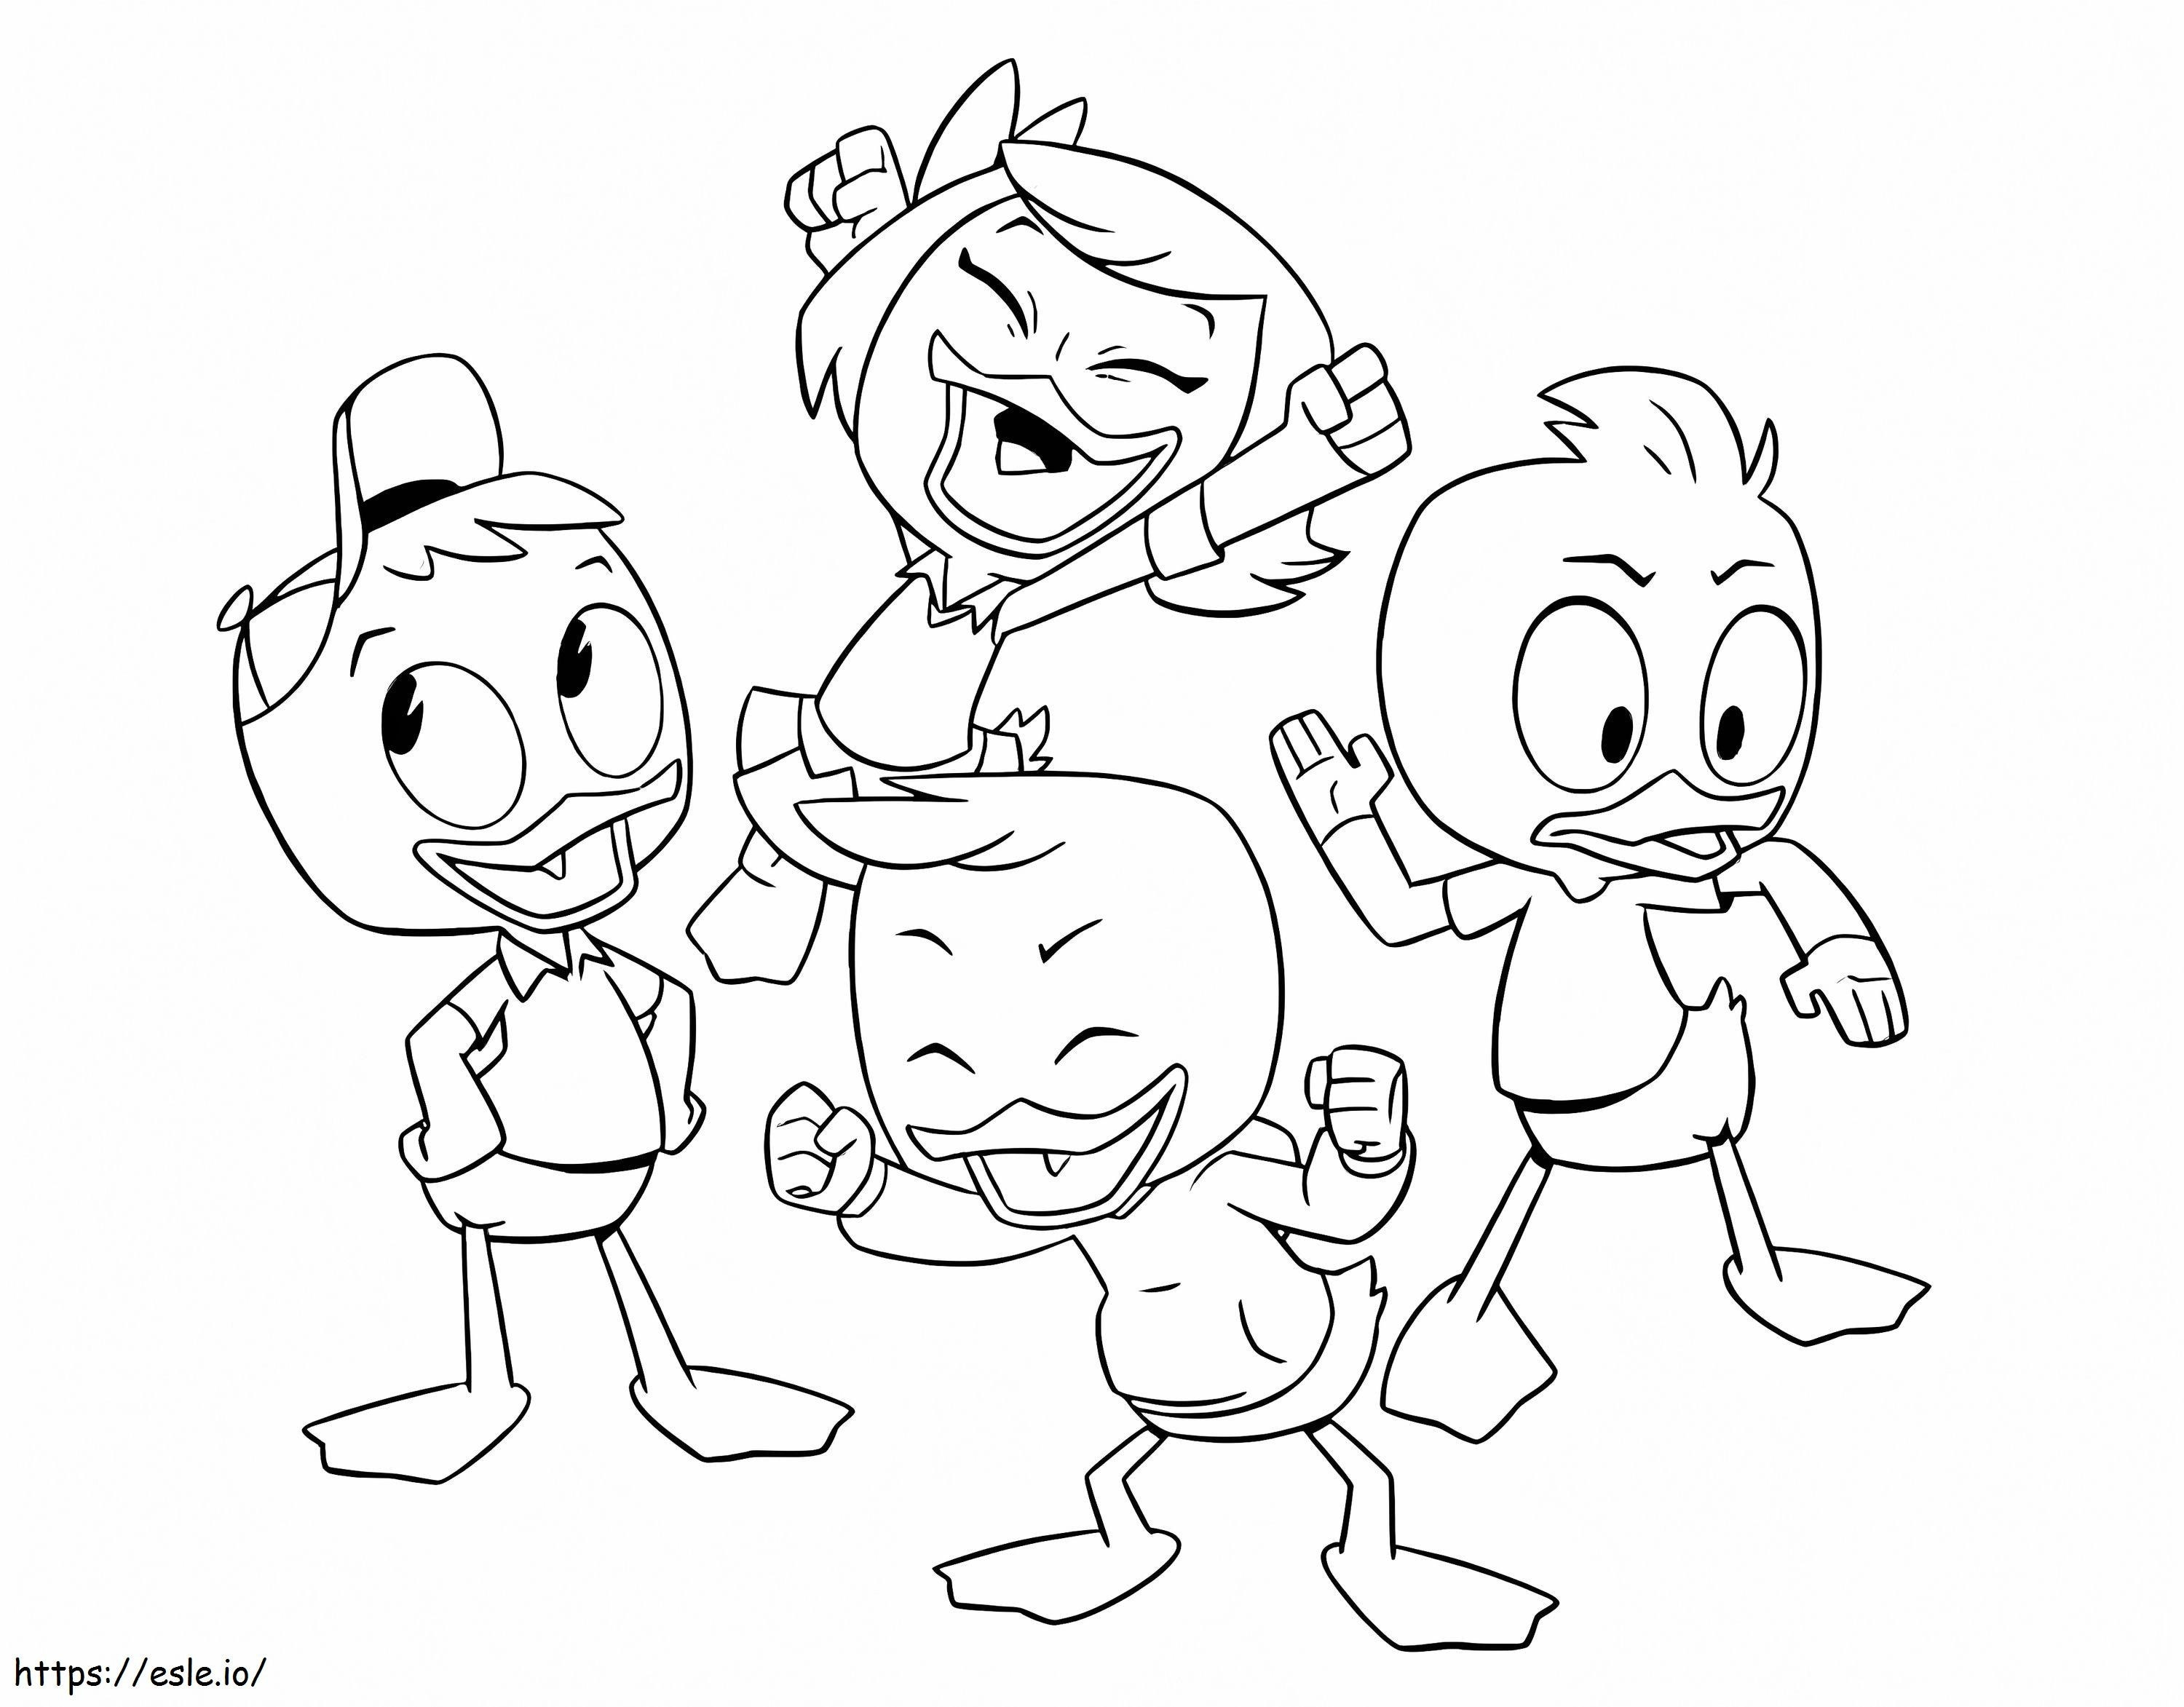 The Little Ducks Of Ducktales coloring page